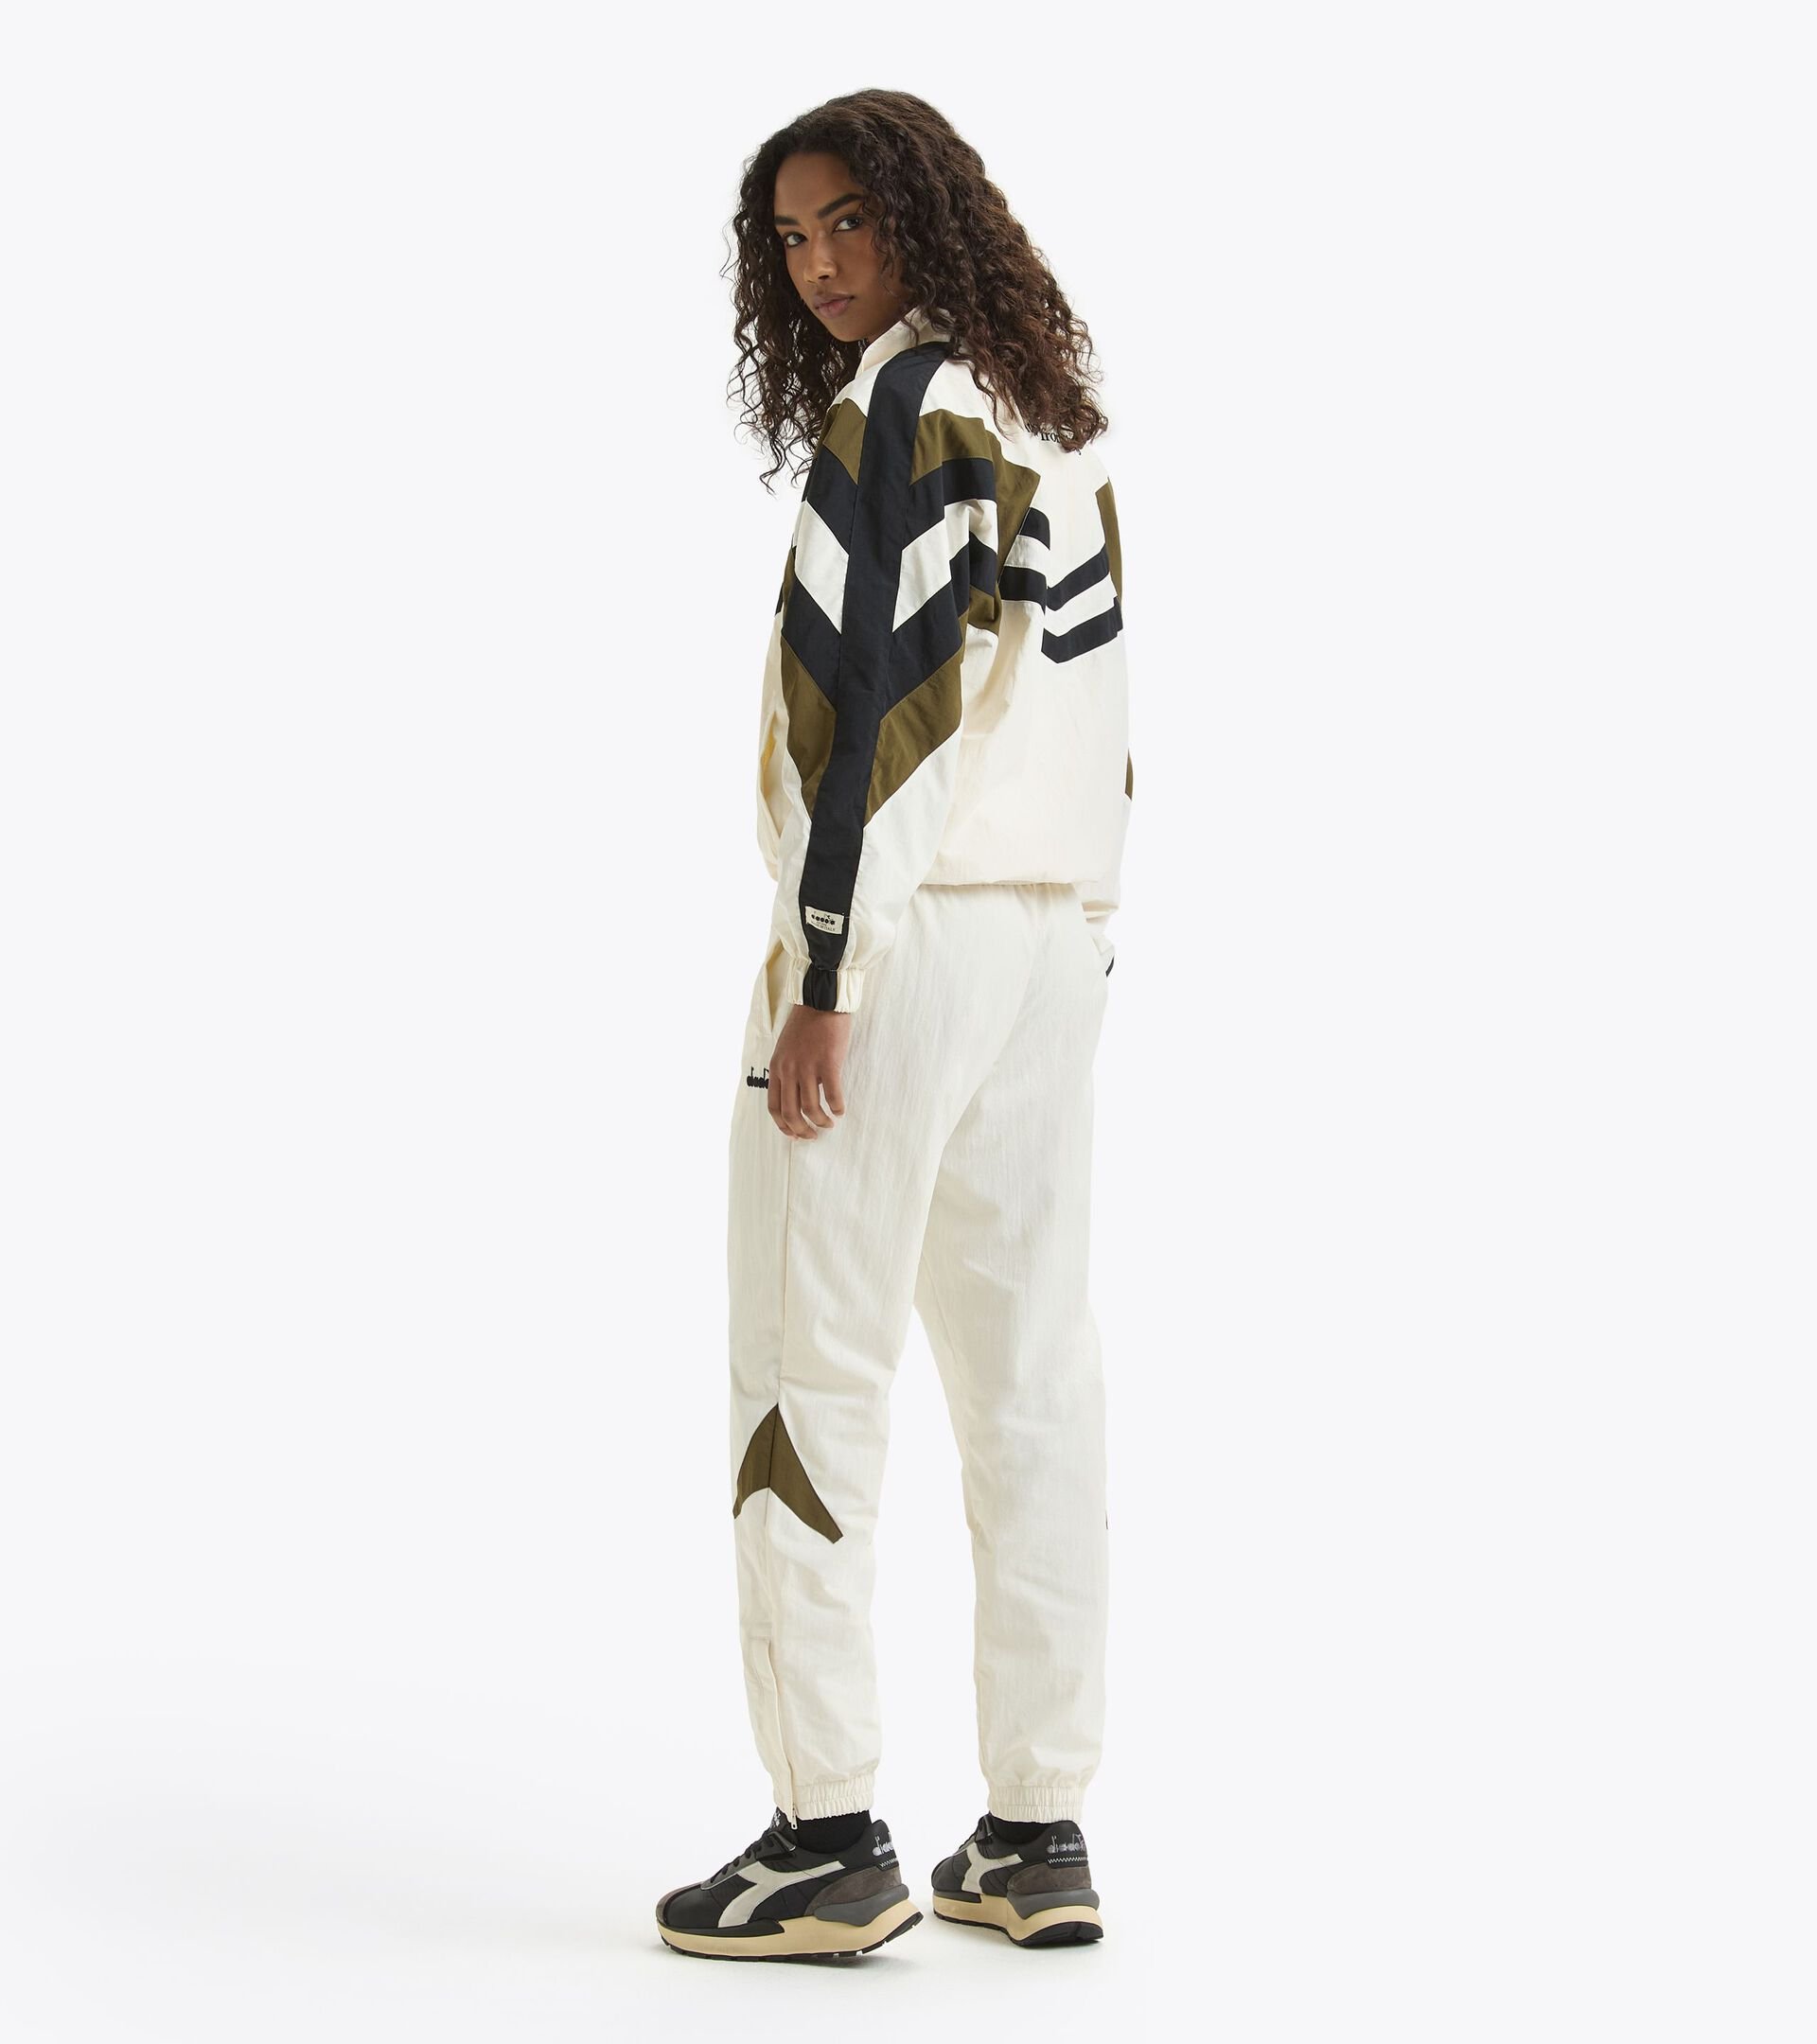 Sporthose - made in Italy - genderneutral TRACK PANTS LEGACY WISPERN WEISS - Diadora